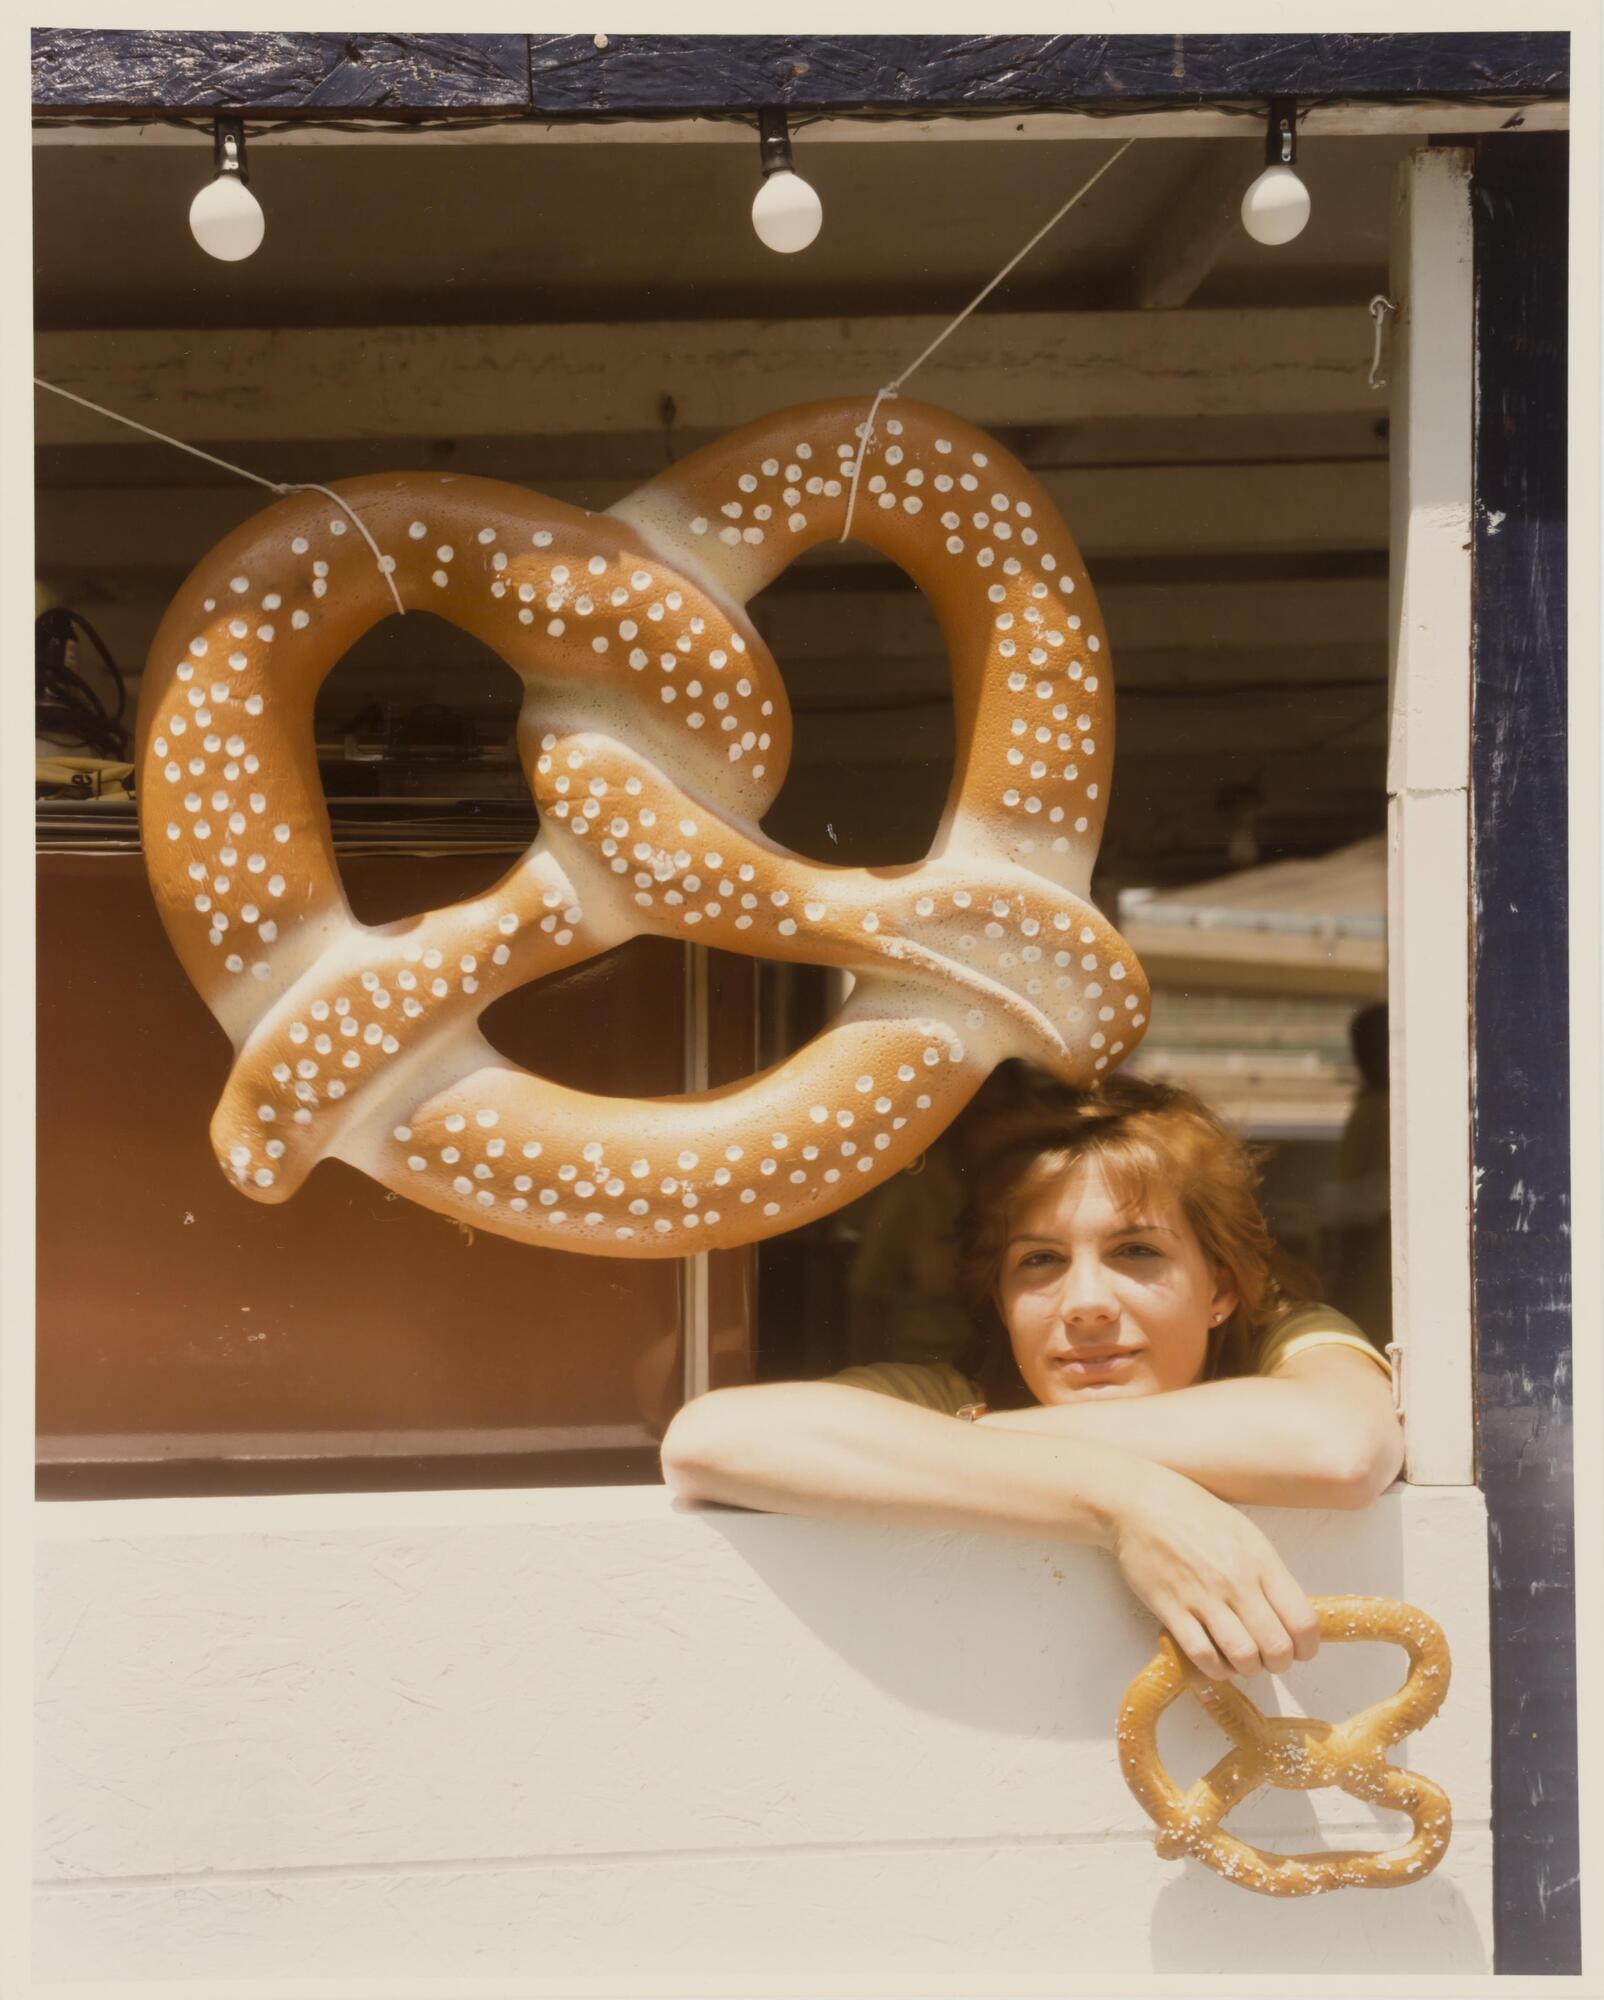 This is an image of a woman at a food stand beneath a suspended sign in the shape of a pretzel.